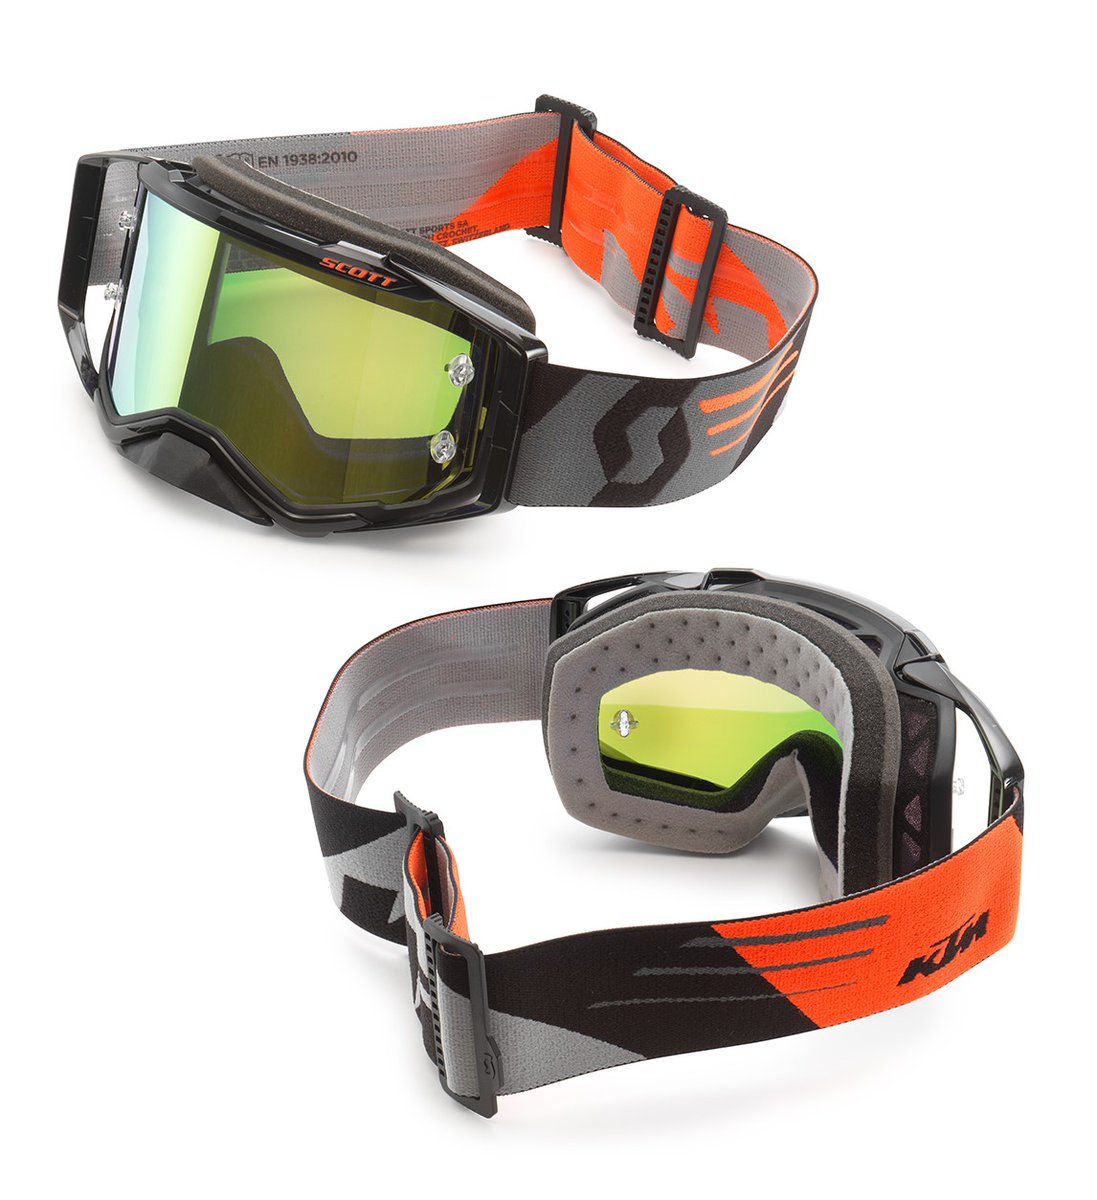 The PROSPECT GOGGLES from @scottmotosports are exclusive to #KTMPowerWear and offer a wide field of view thanks to it's large injected polycarbonate lens. The removable nose guard, anti-fog properties + Lens Lock System make these goggles #READYTORACE! Spare clear lens included.